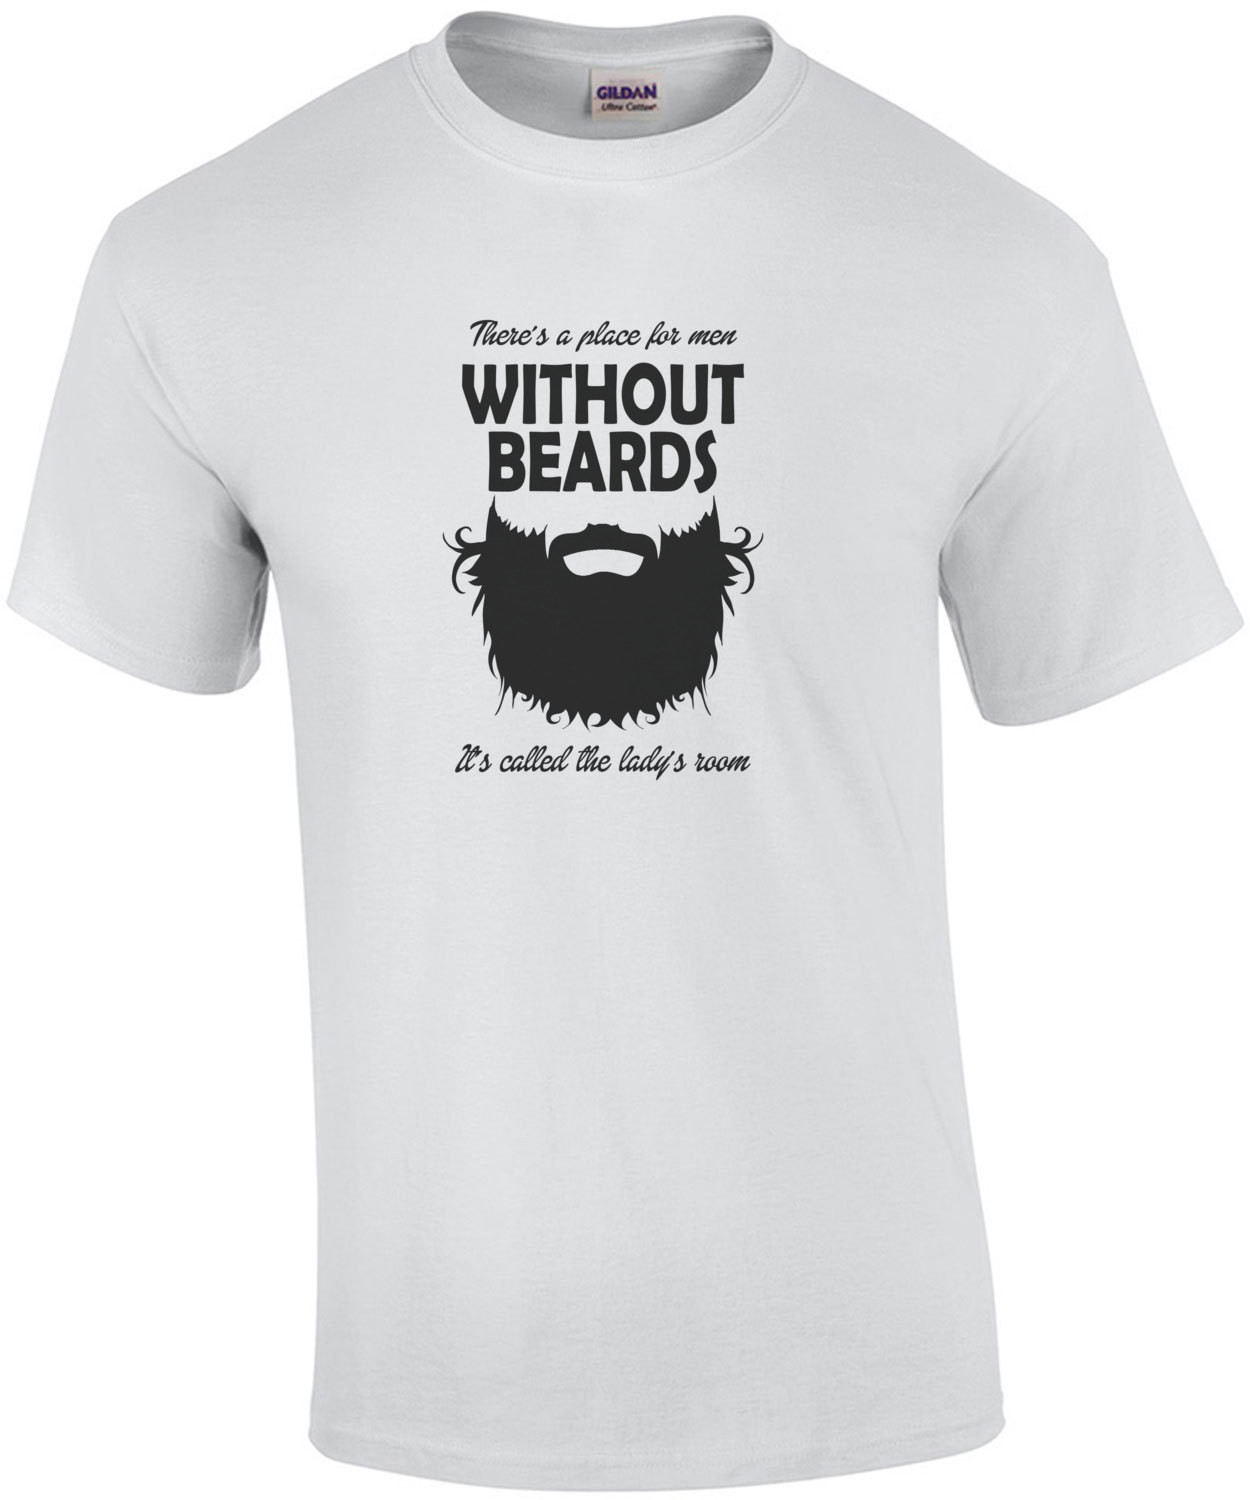 Theres A Place For Men Without Beards It's Called The Ladys Room T-Shirt